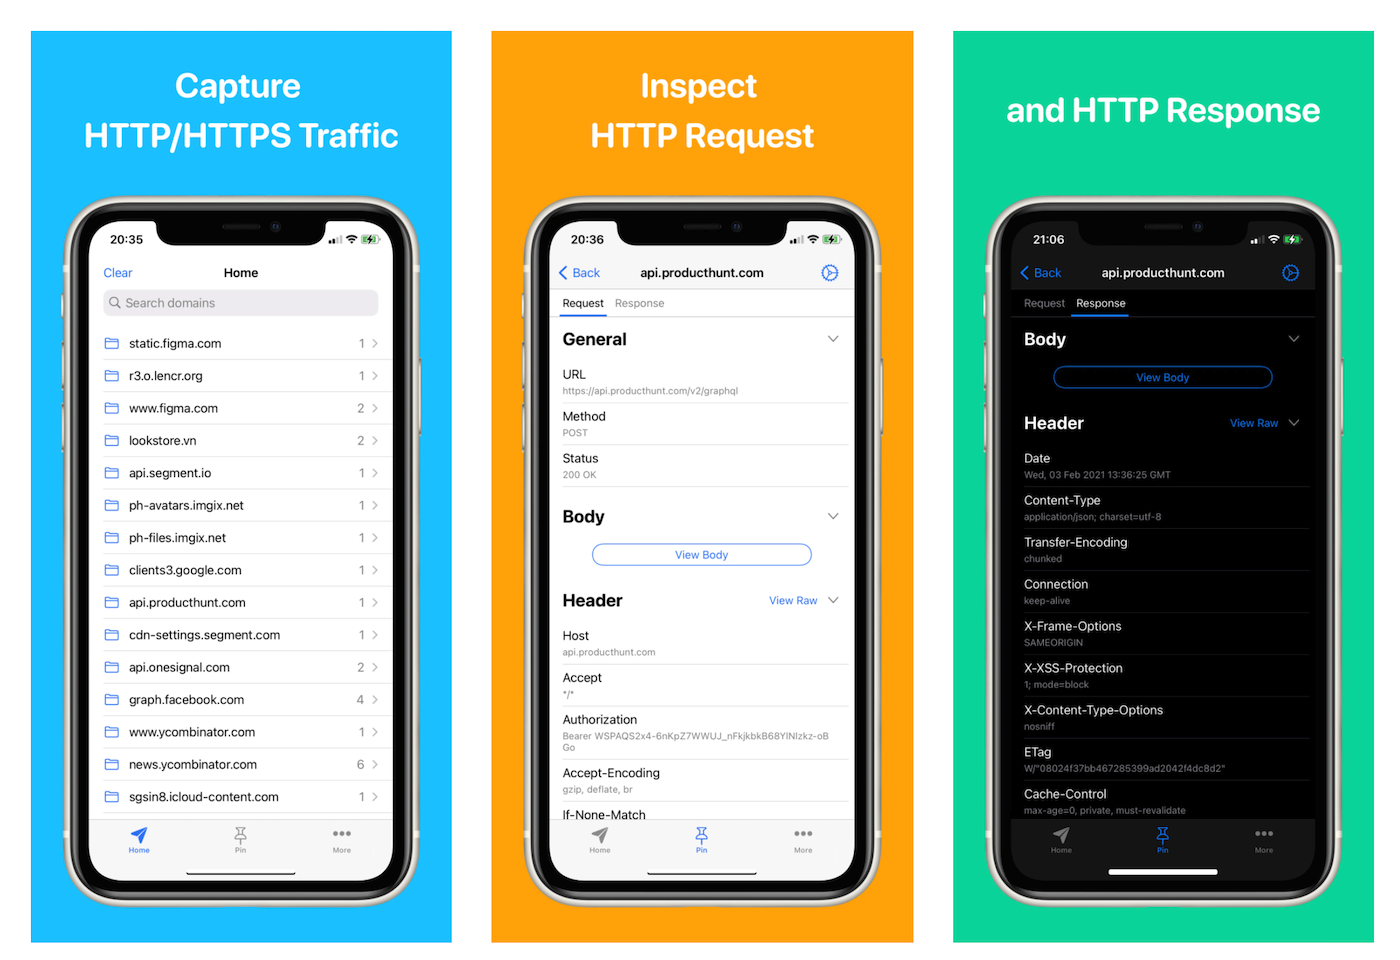 Cover Image for Capture and inspect HTTPs traffic from iPhone